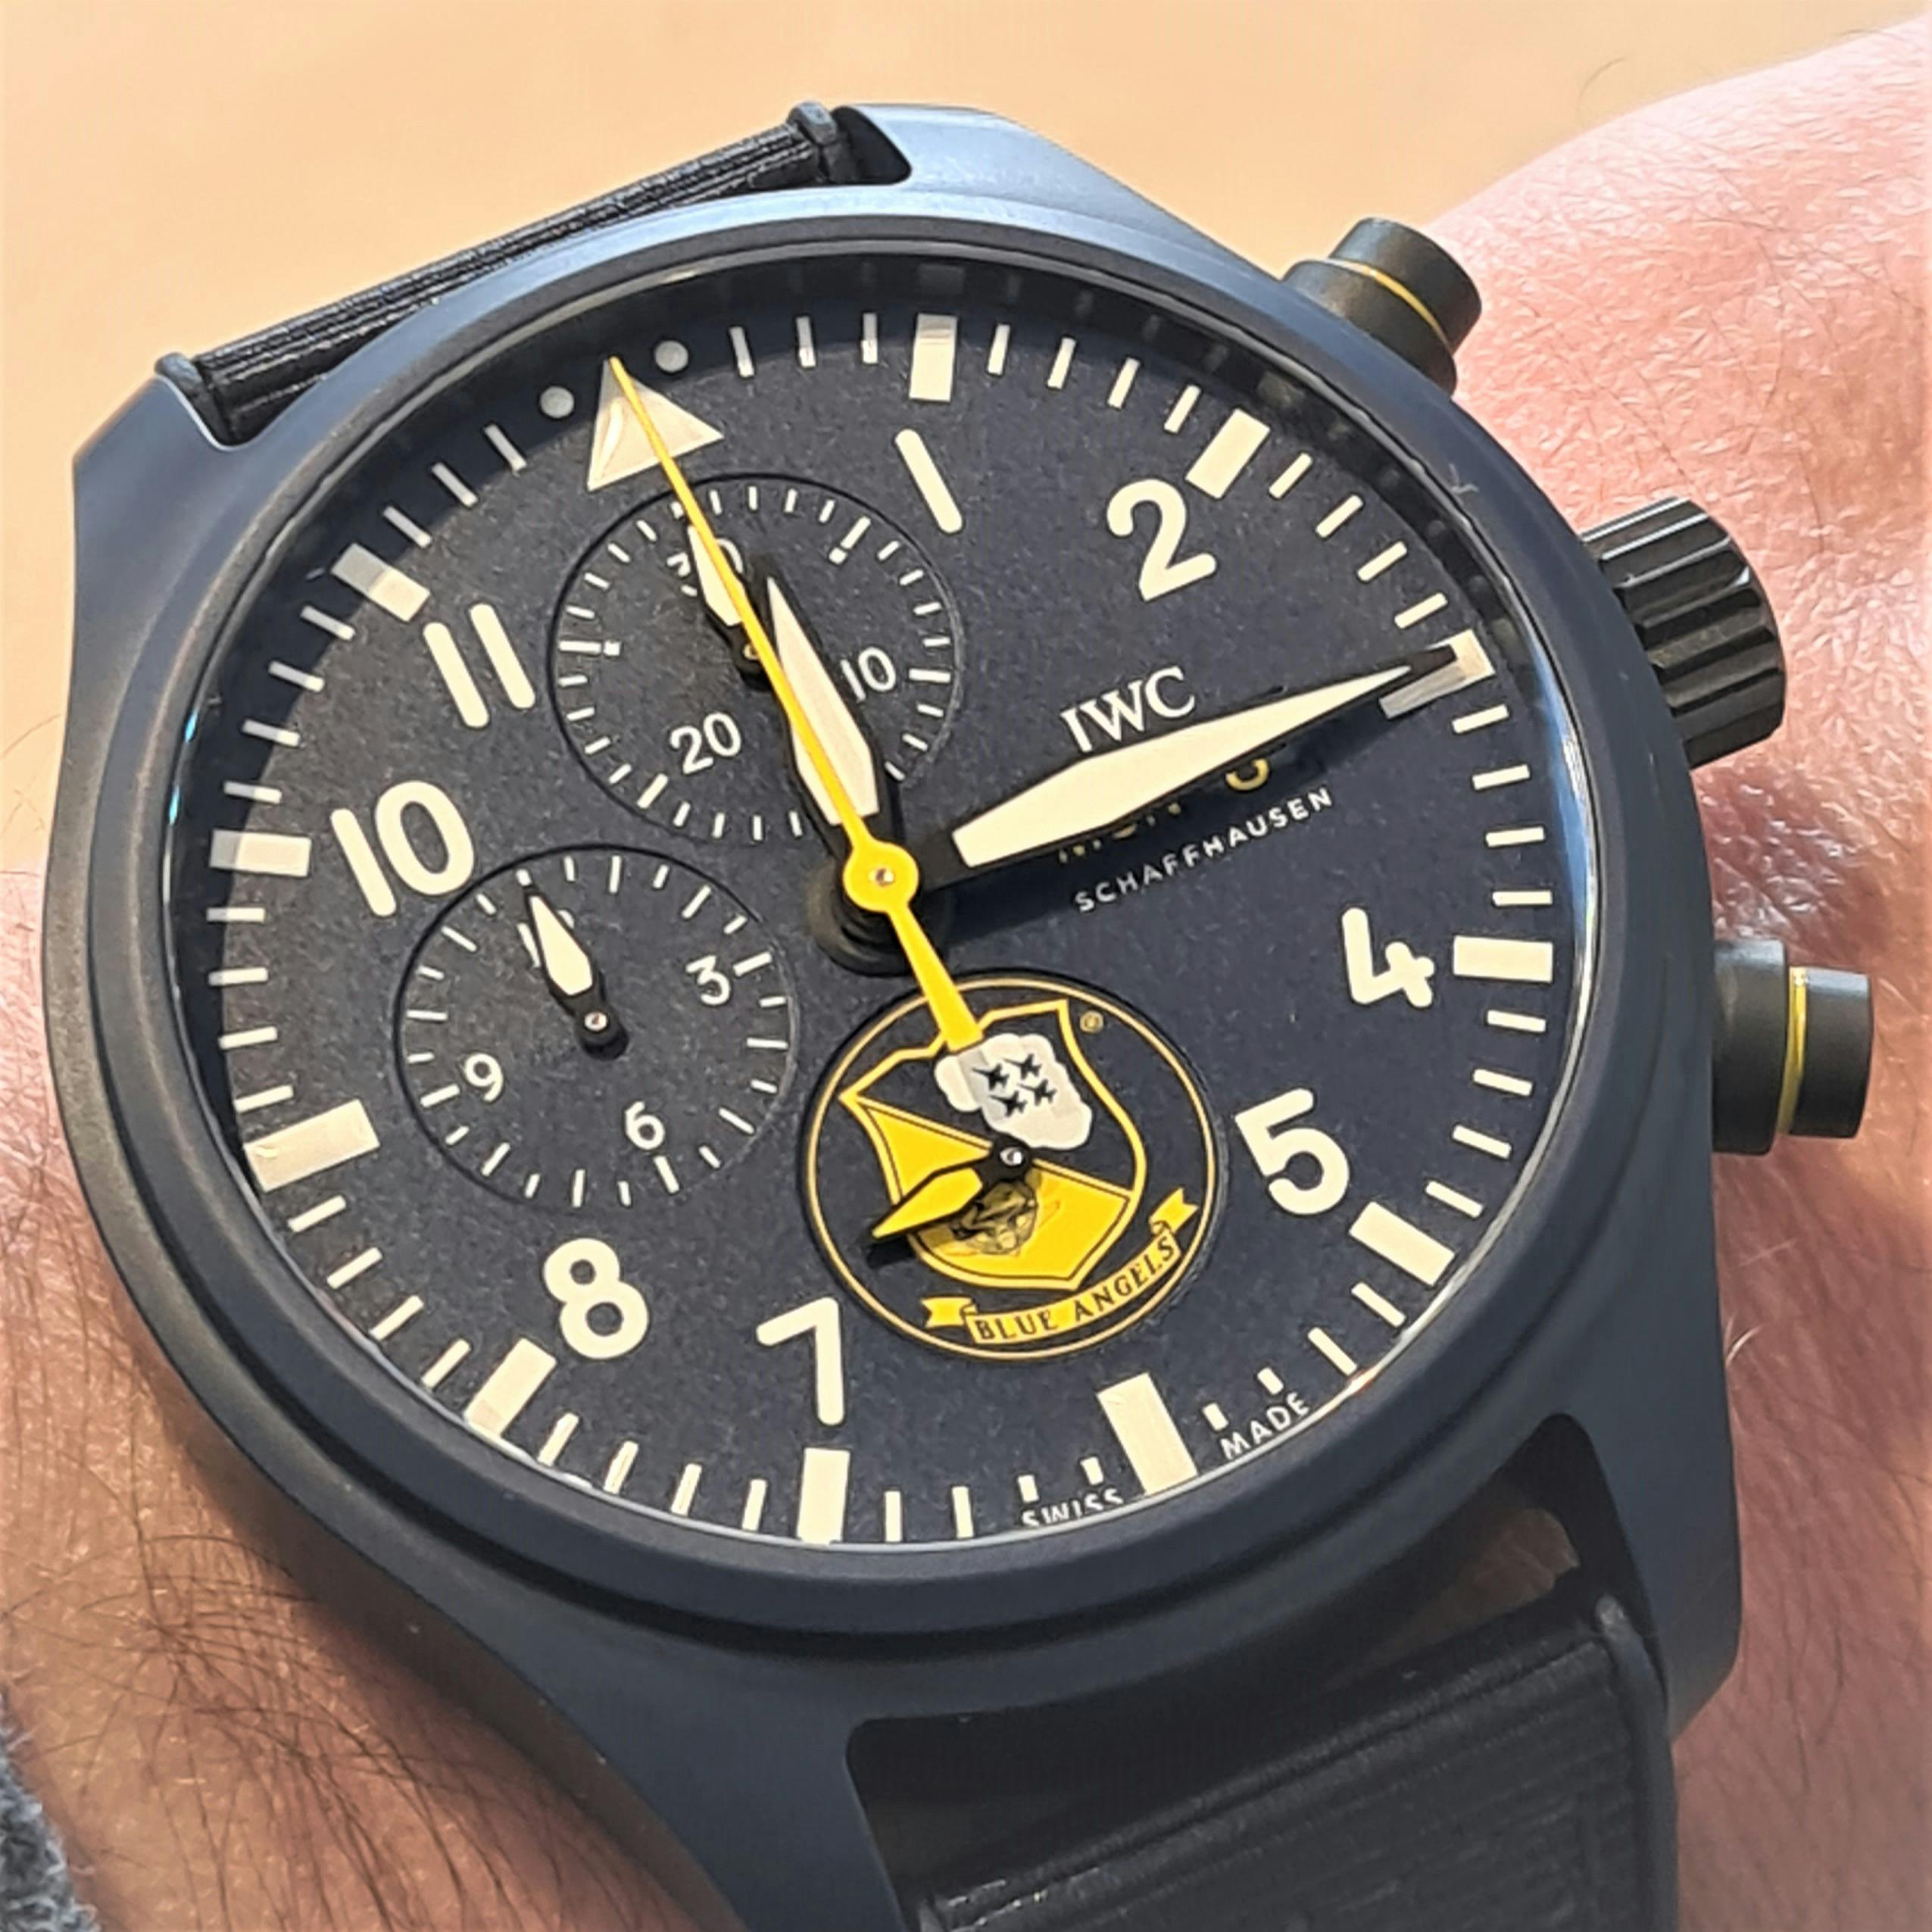 Large Dark blue chronograph watch from IWC with dark blue case dial pushers and strap white hands and indices and yellow seconds hand and Blue angels logo a the six o'clock position